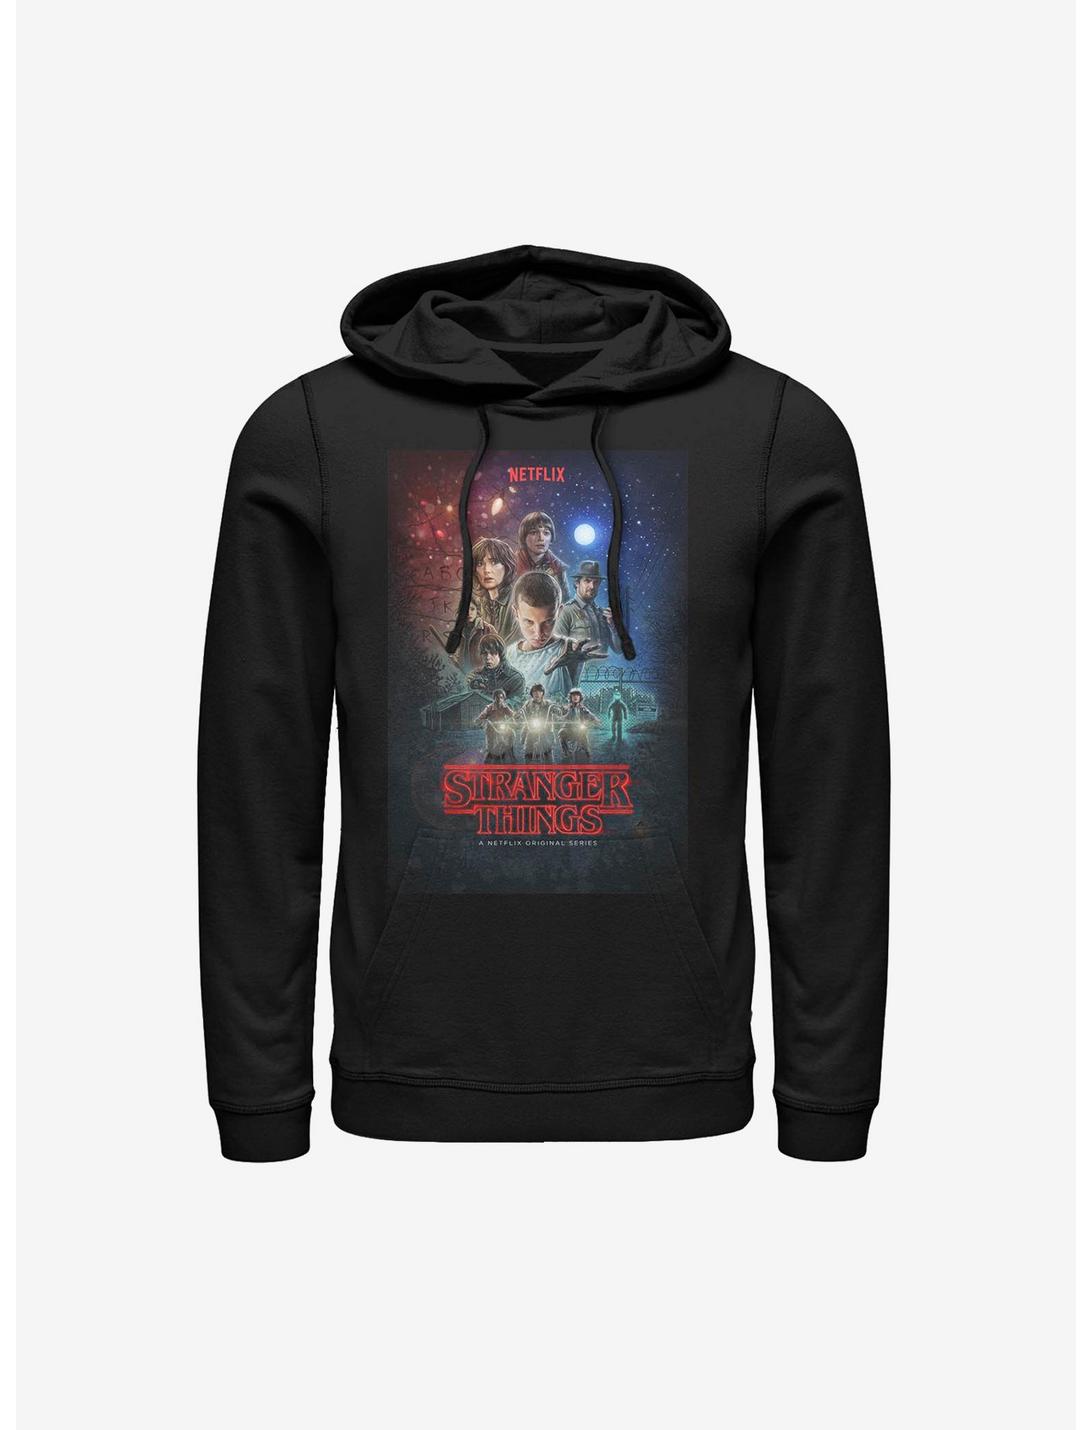 Stranger Things Classic Illustrated Poster Hoodie, BLACK, hi-res